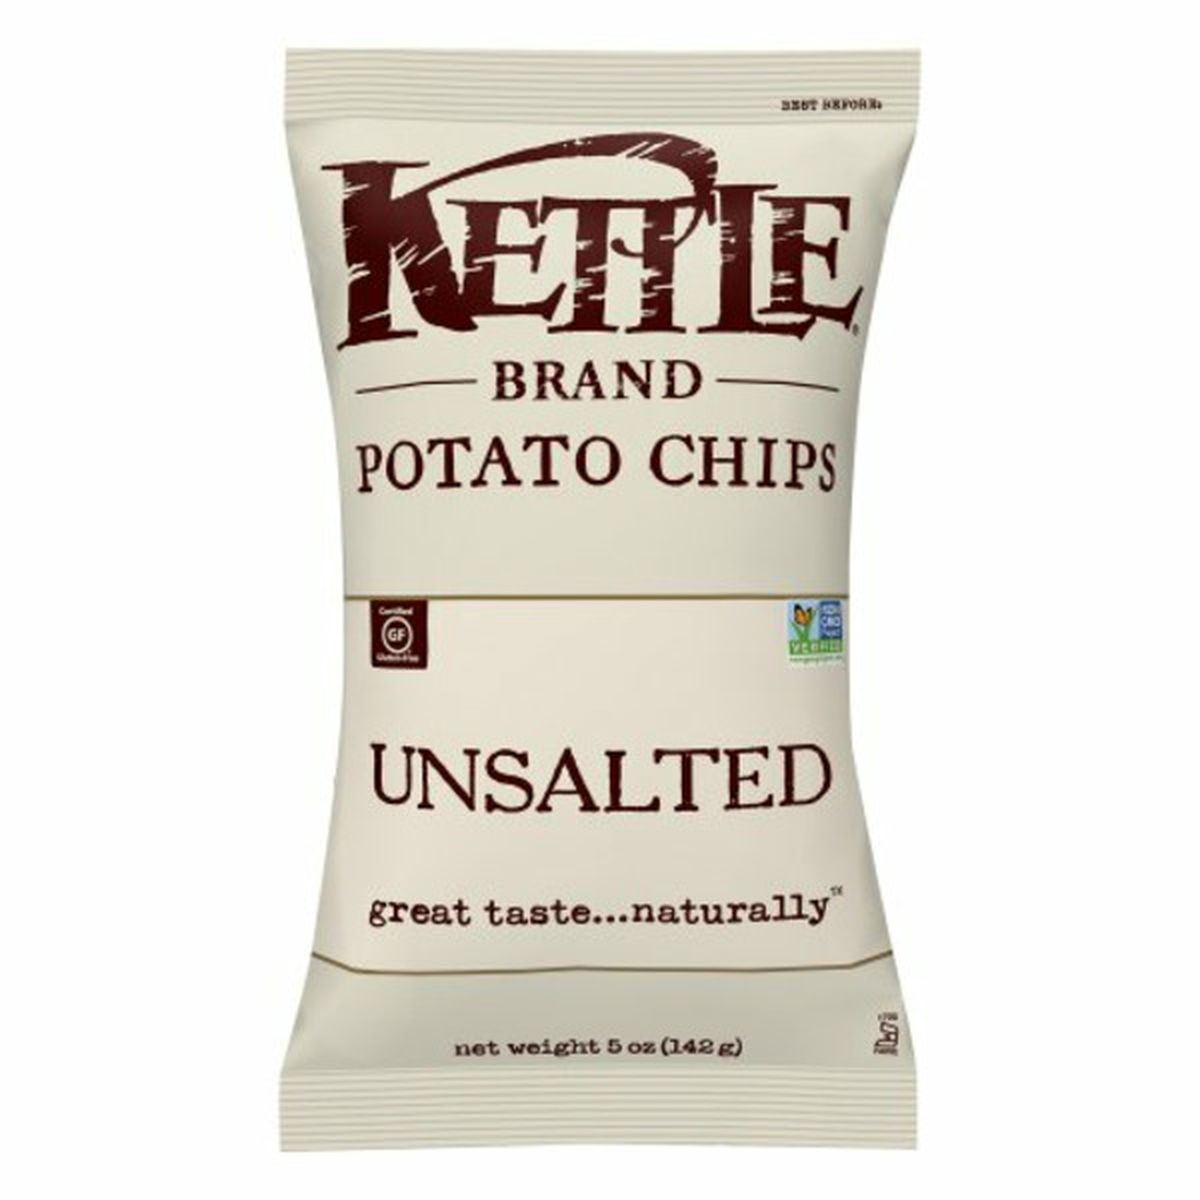 Calories in Kettle Brands Potato Chips, Unsalted